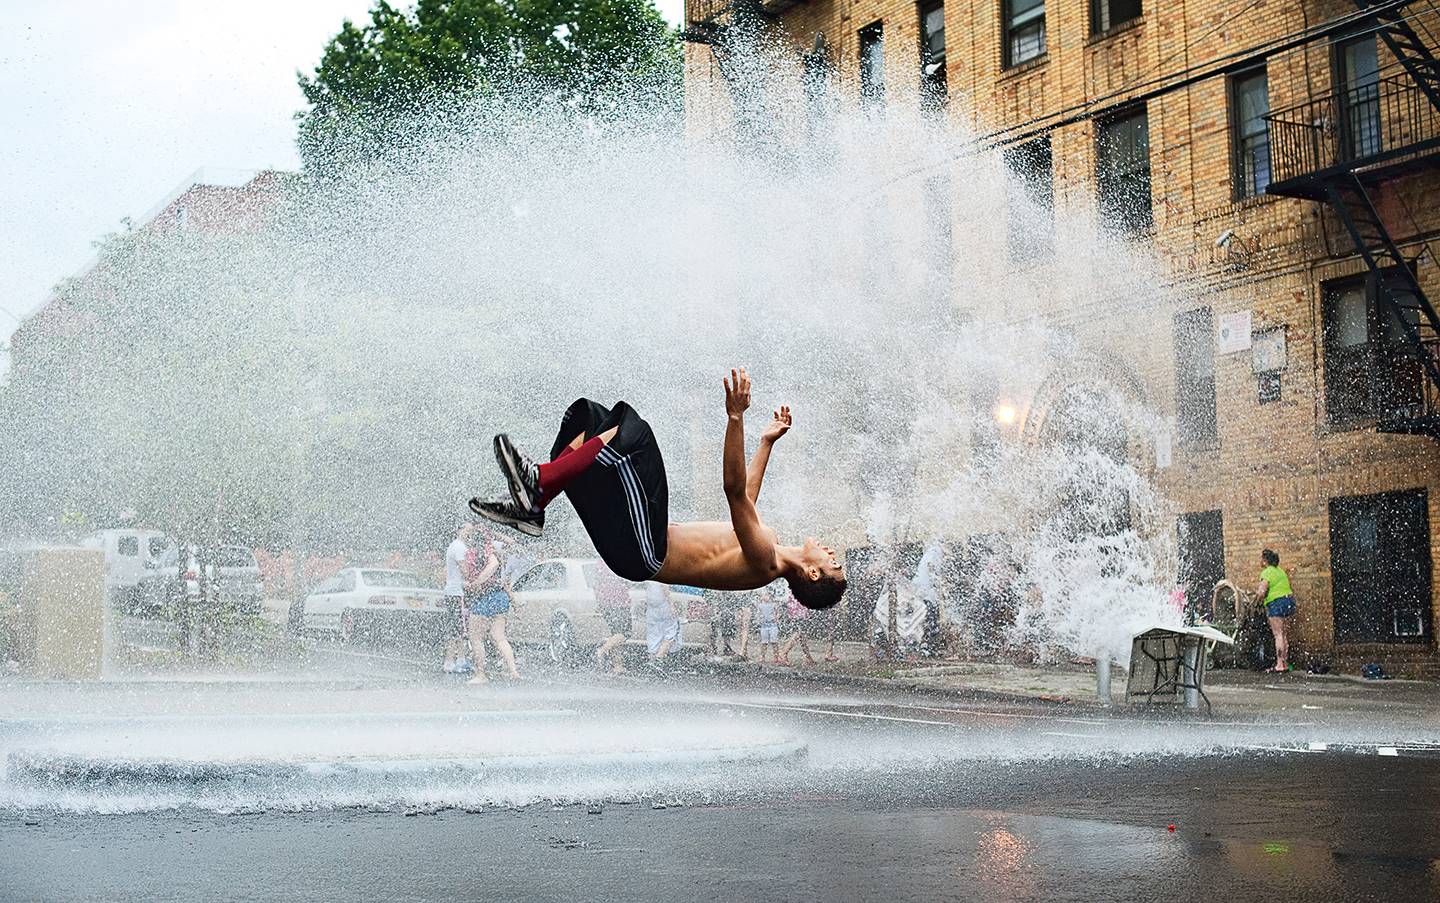 A man does a backflip in the spray of an open fire hydrant